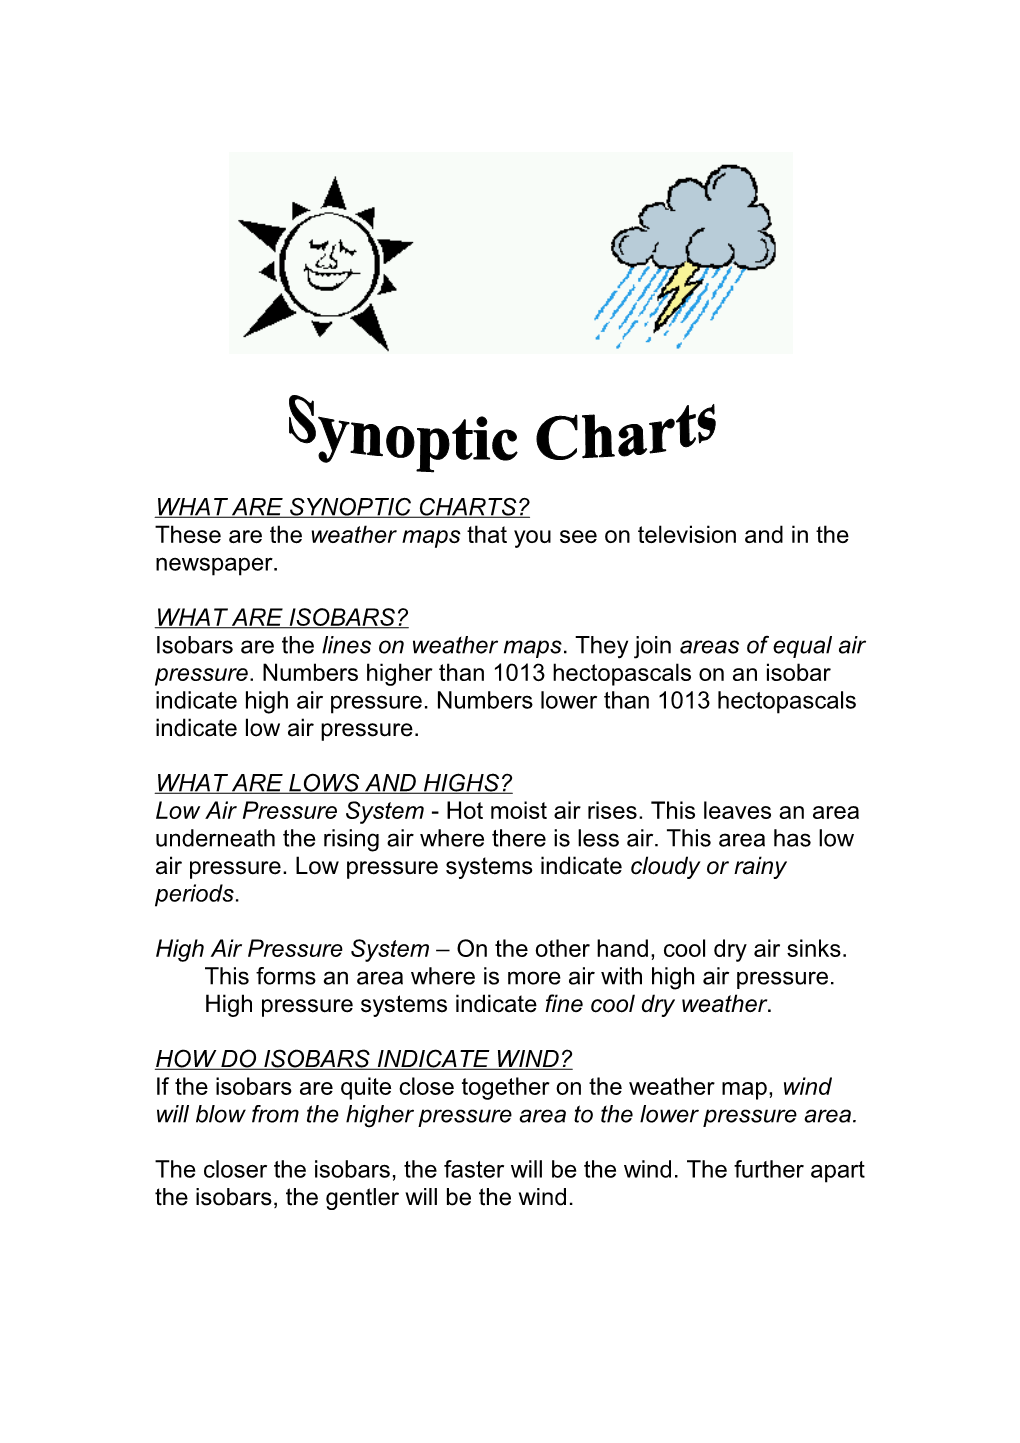 What Are Synoptic Charts?